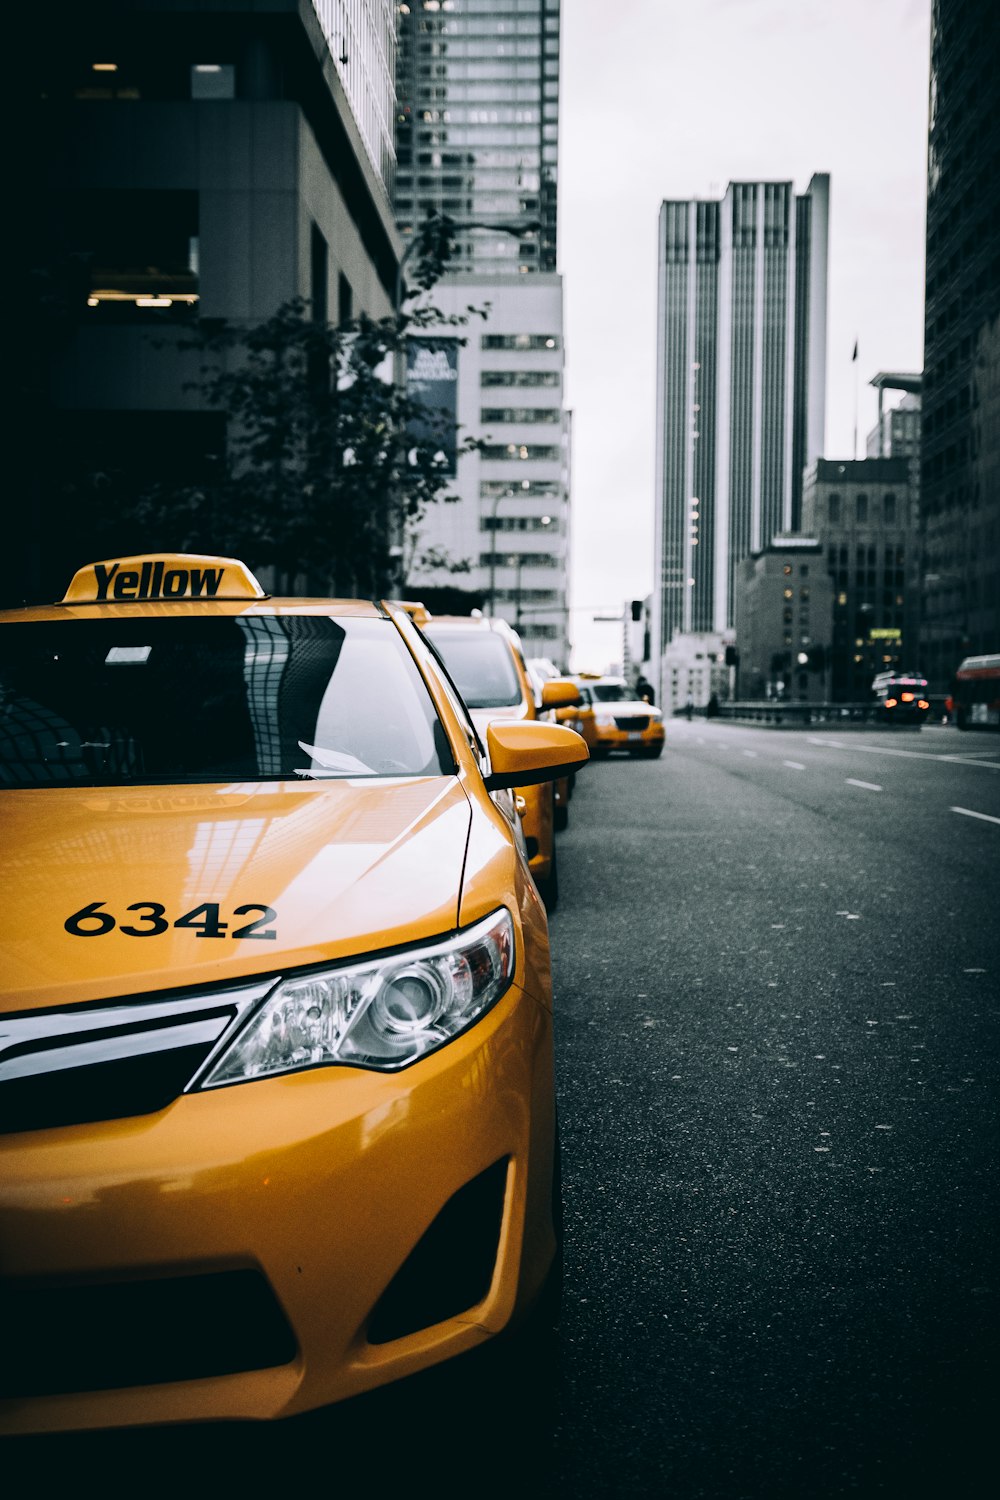 a yellow taxi cab on a street